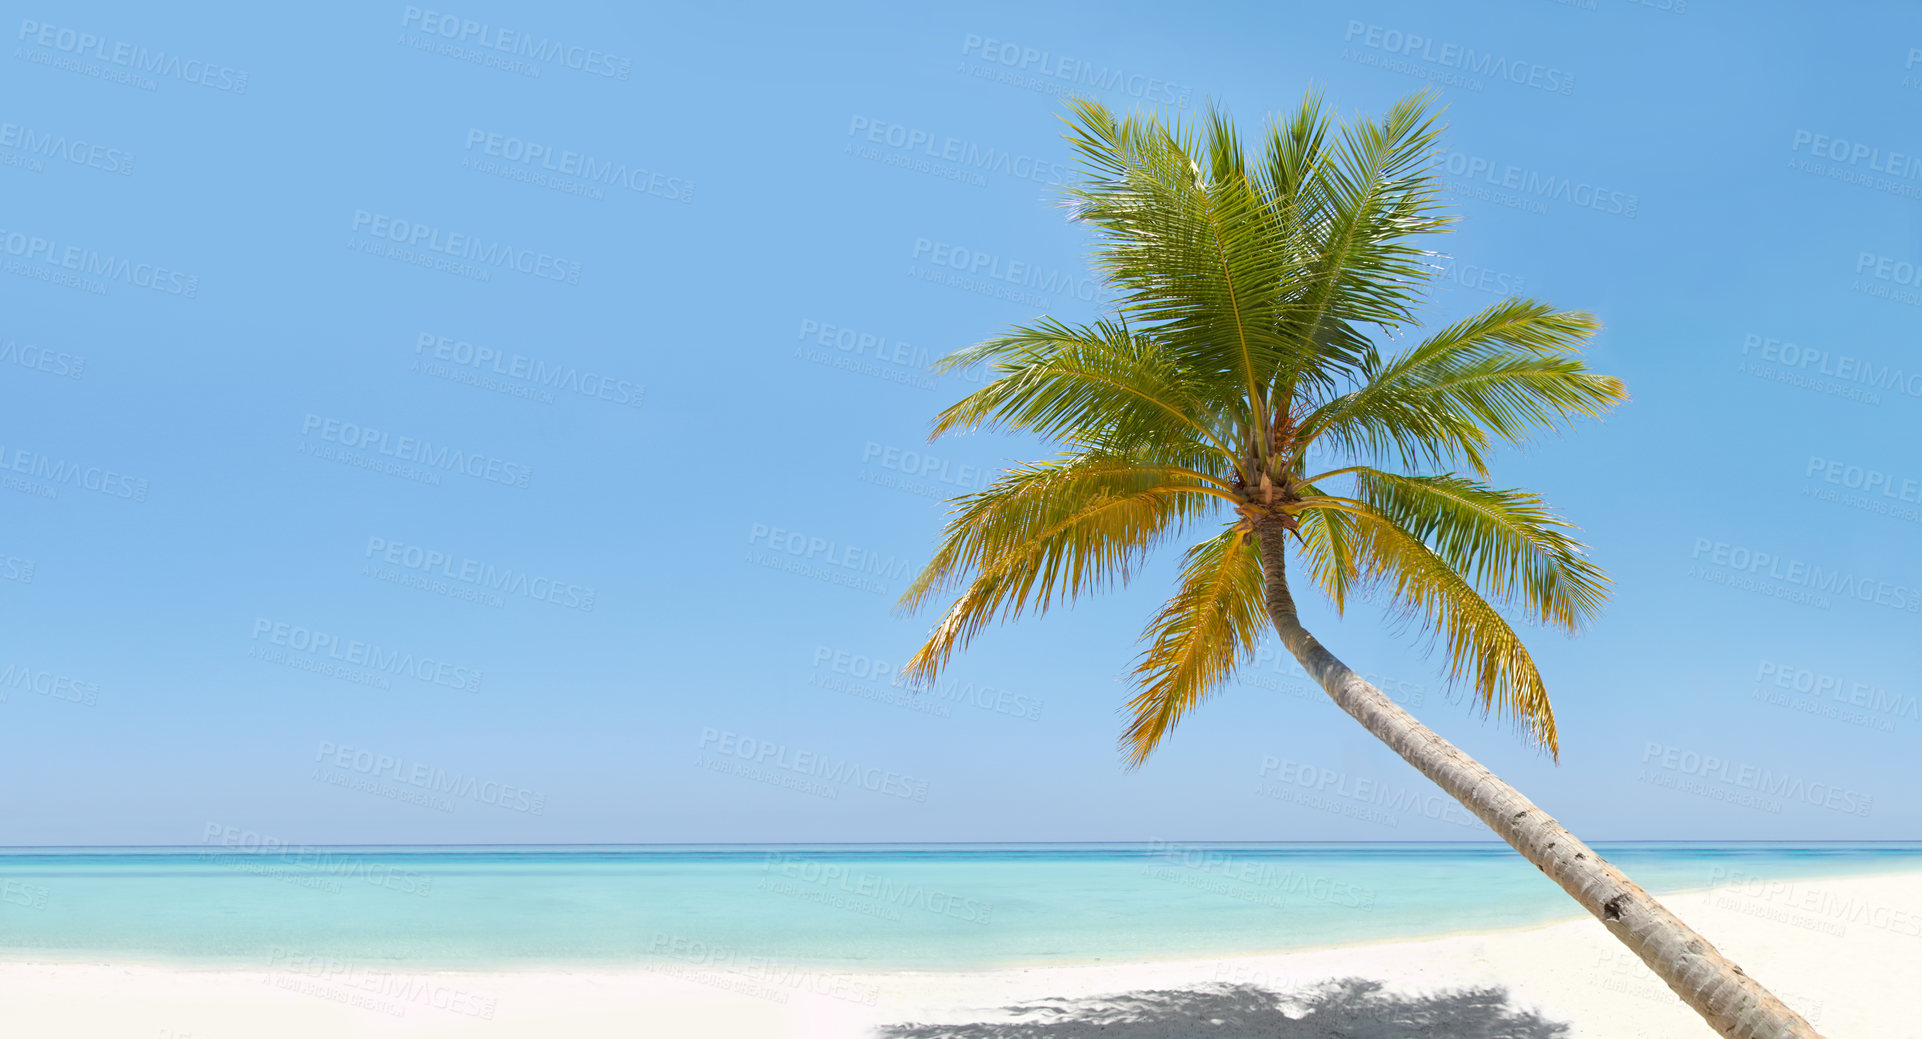 Buy stock photo A beautiful turquoise ocean with a palm tree in the foreground